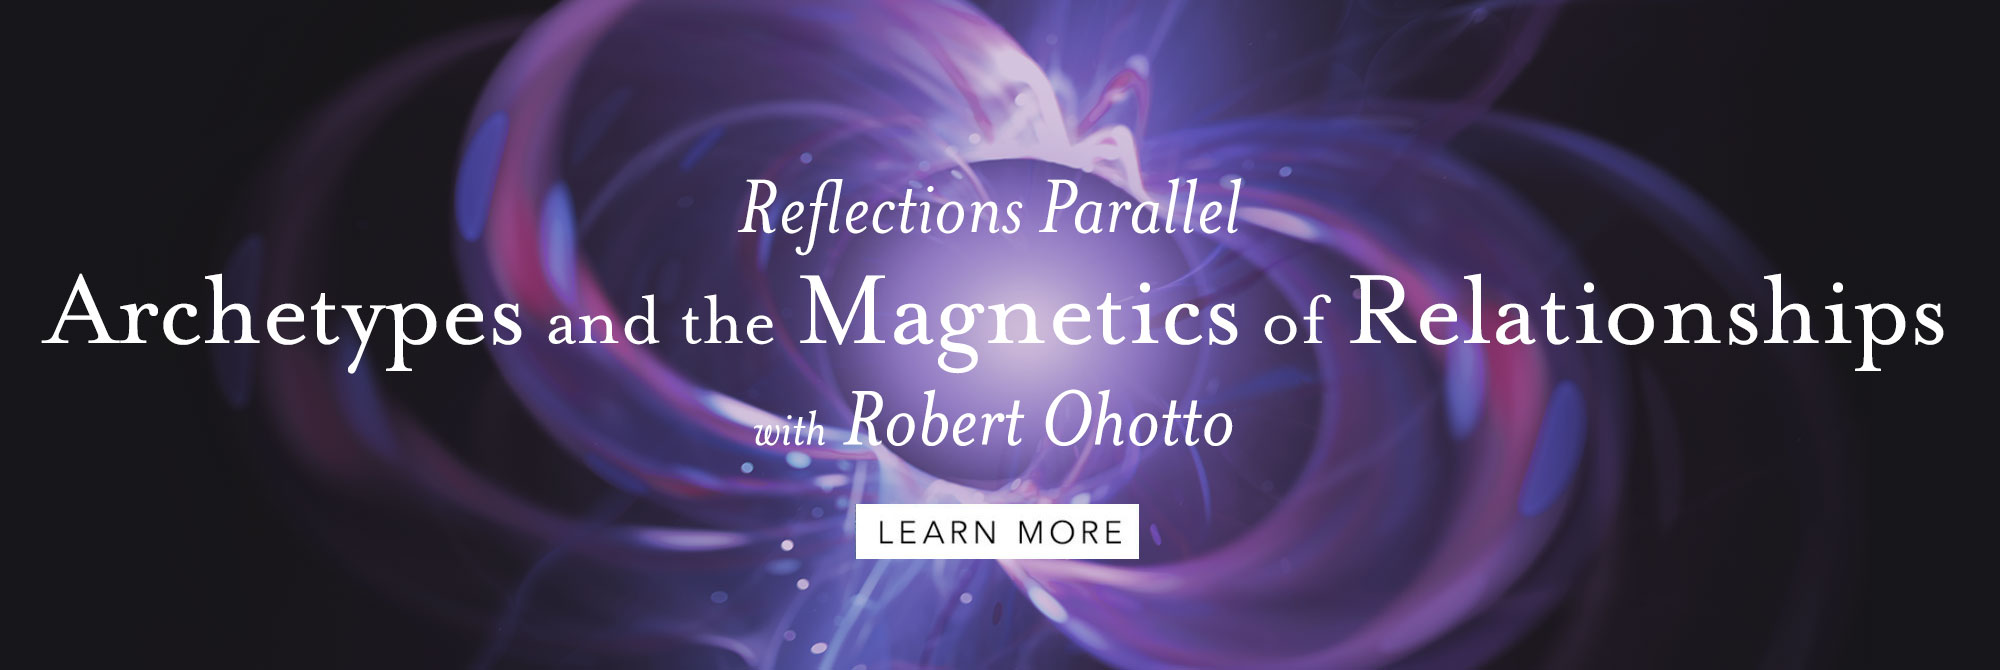 Reflections Parallel: Archetypes and the Magnetics of Relationships